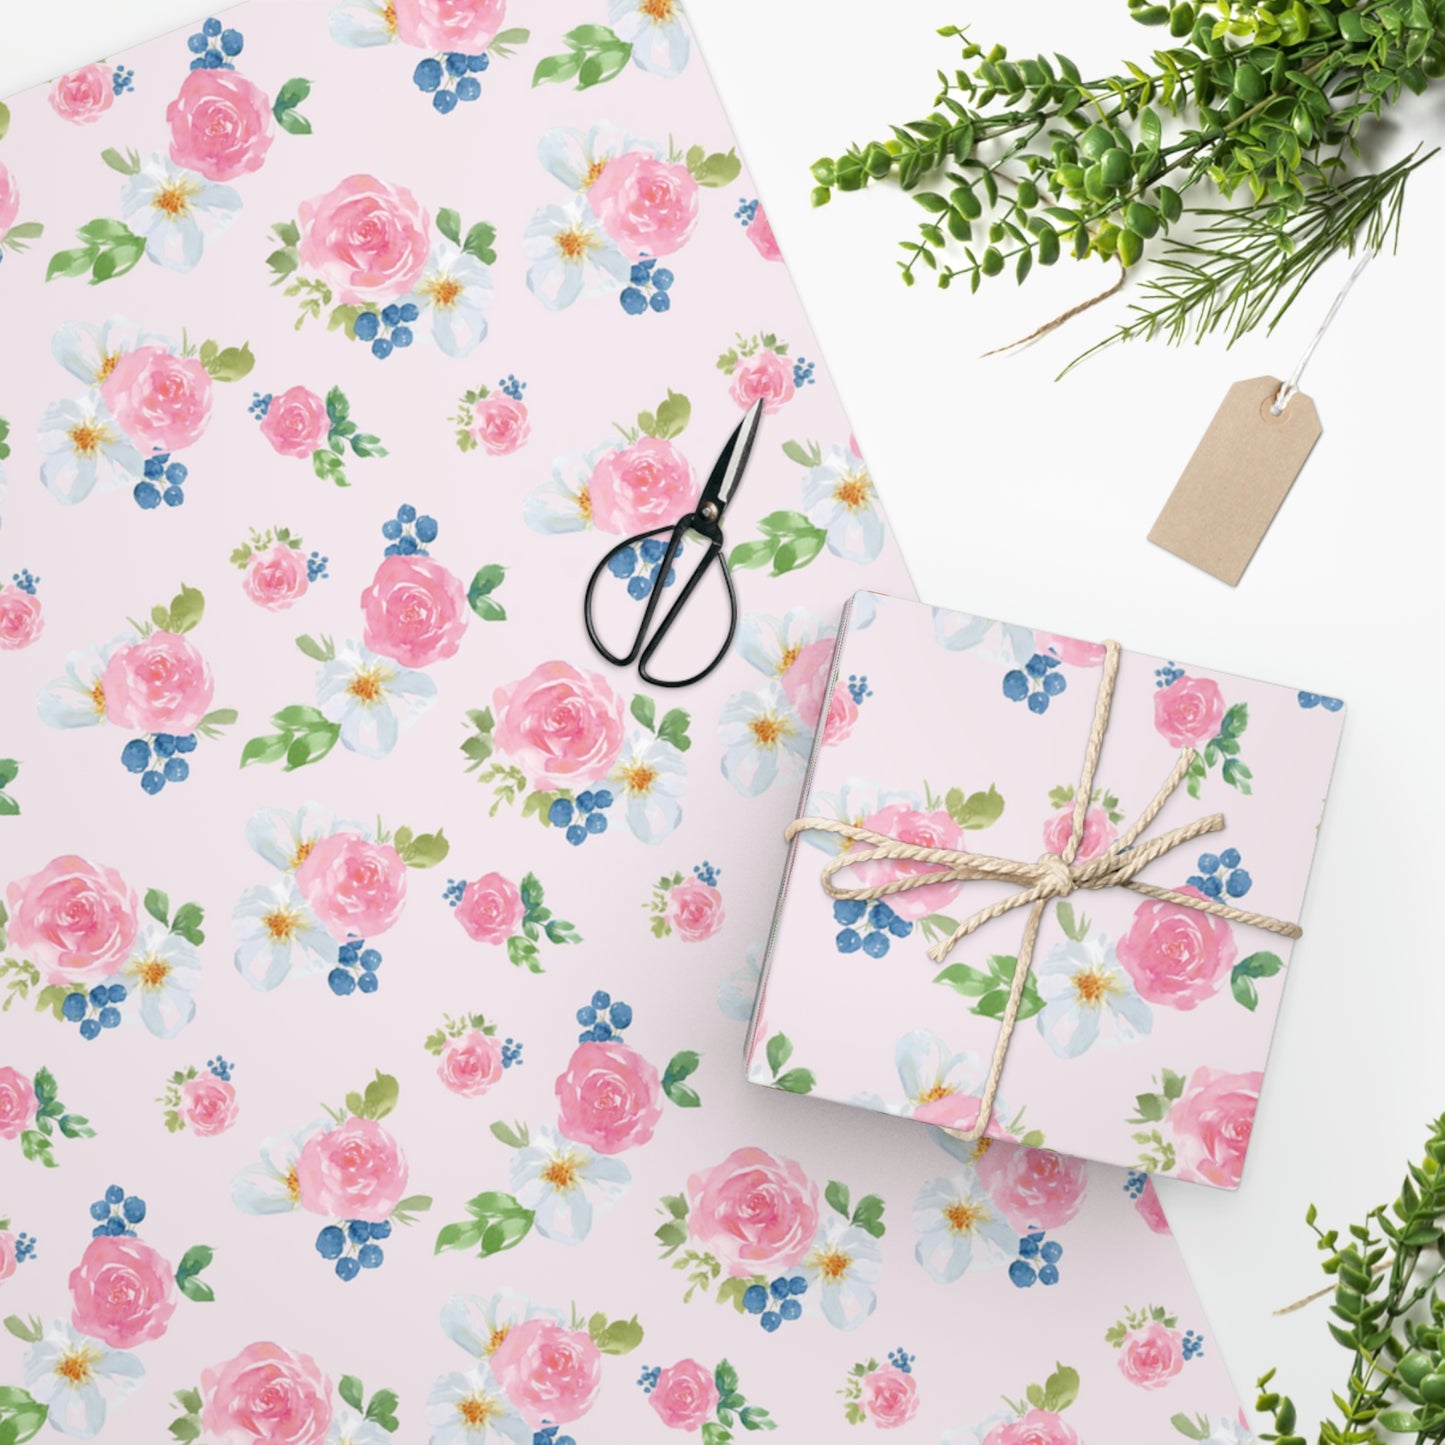 Vintage Pink Floral Wrapping Paper